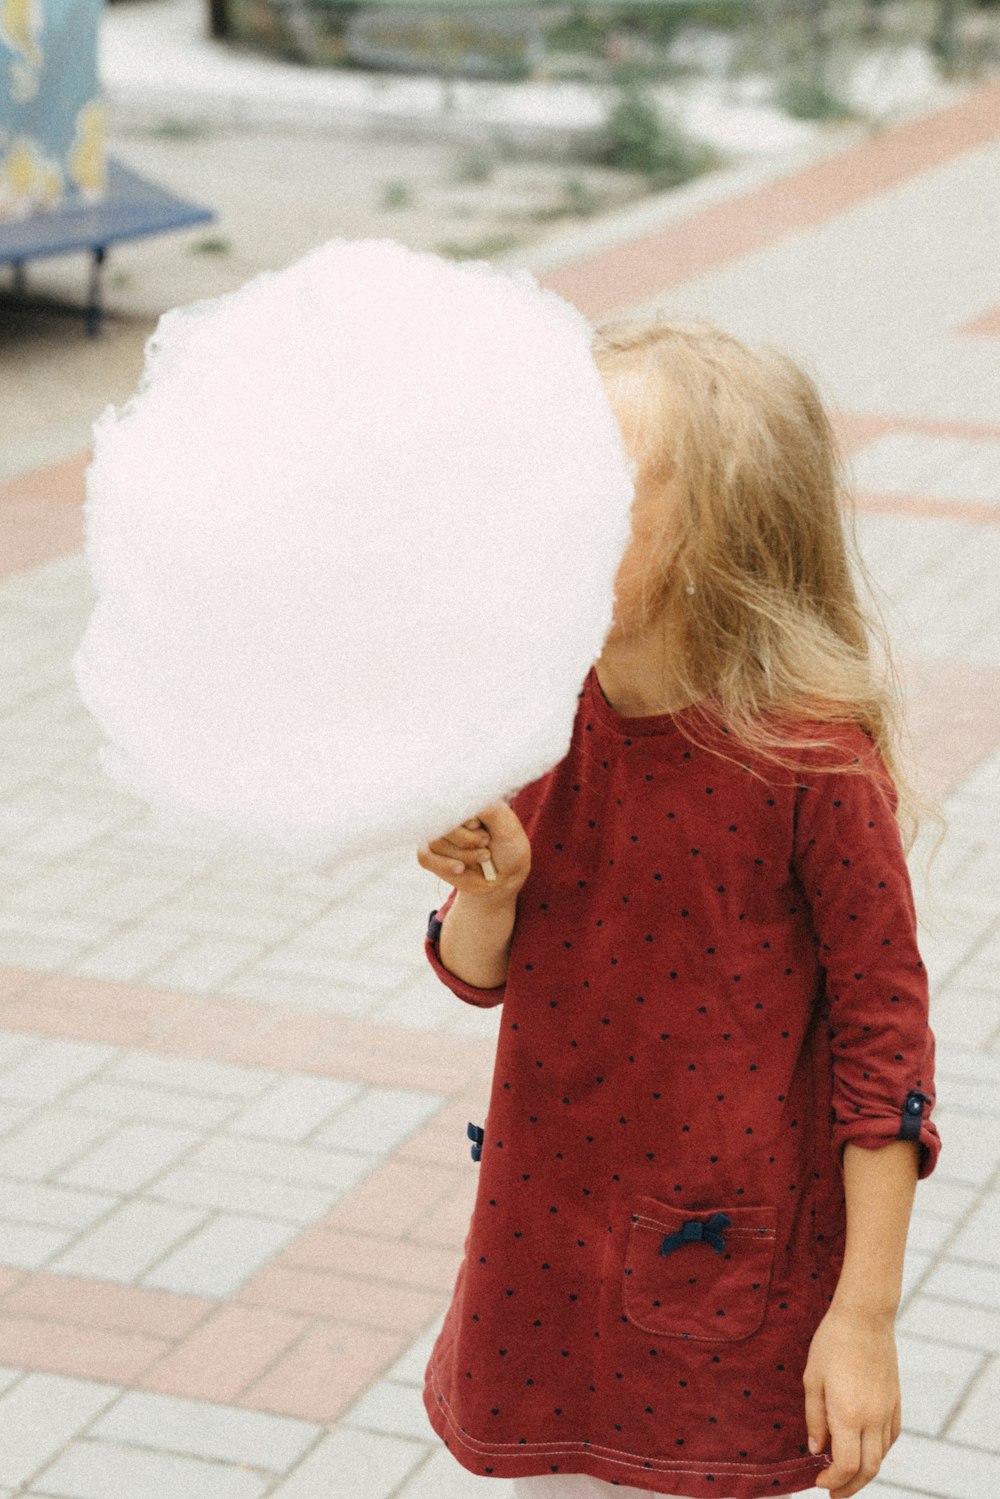 a little girl holding a large white cotton ball